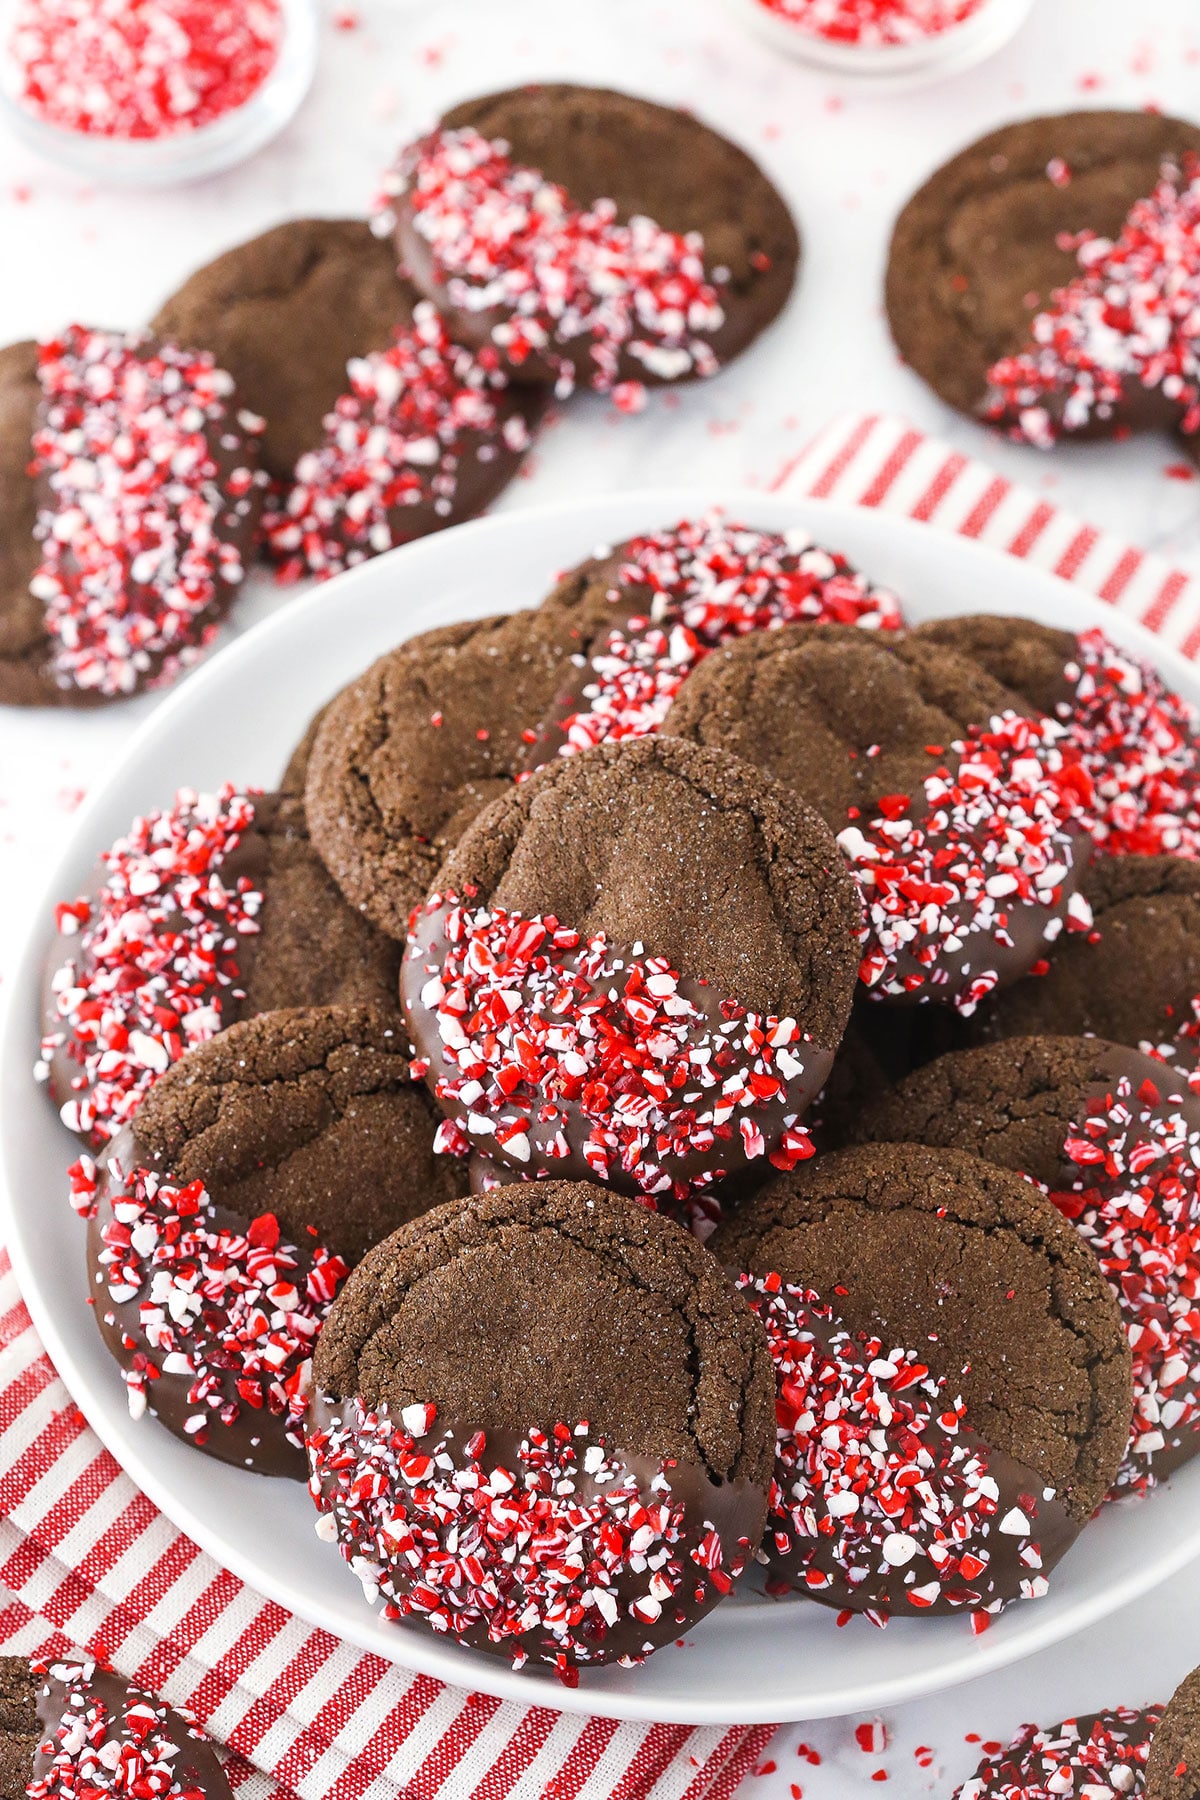 A plate piled high with chocolate peppermint sugar cookies on top of a red and white kitchen towel